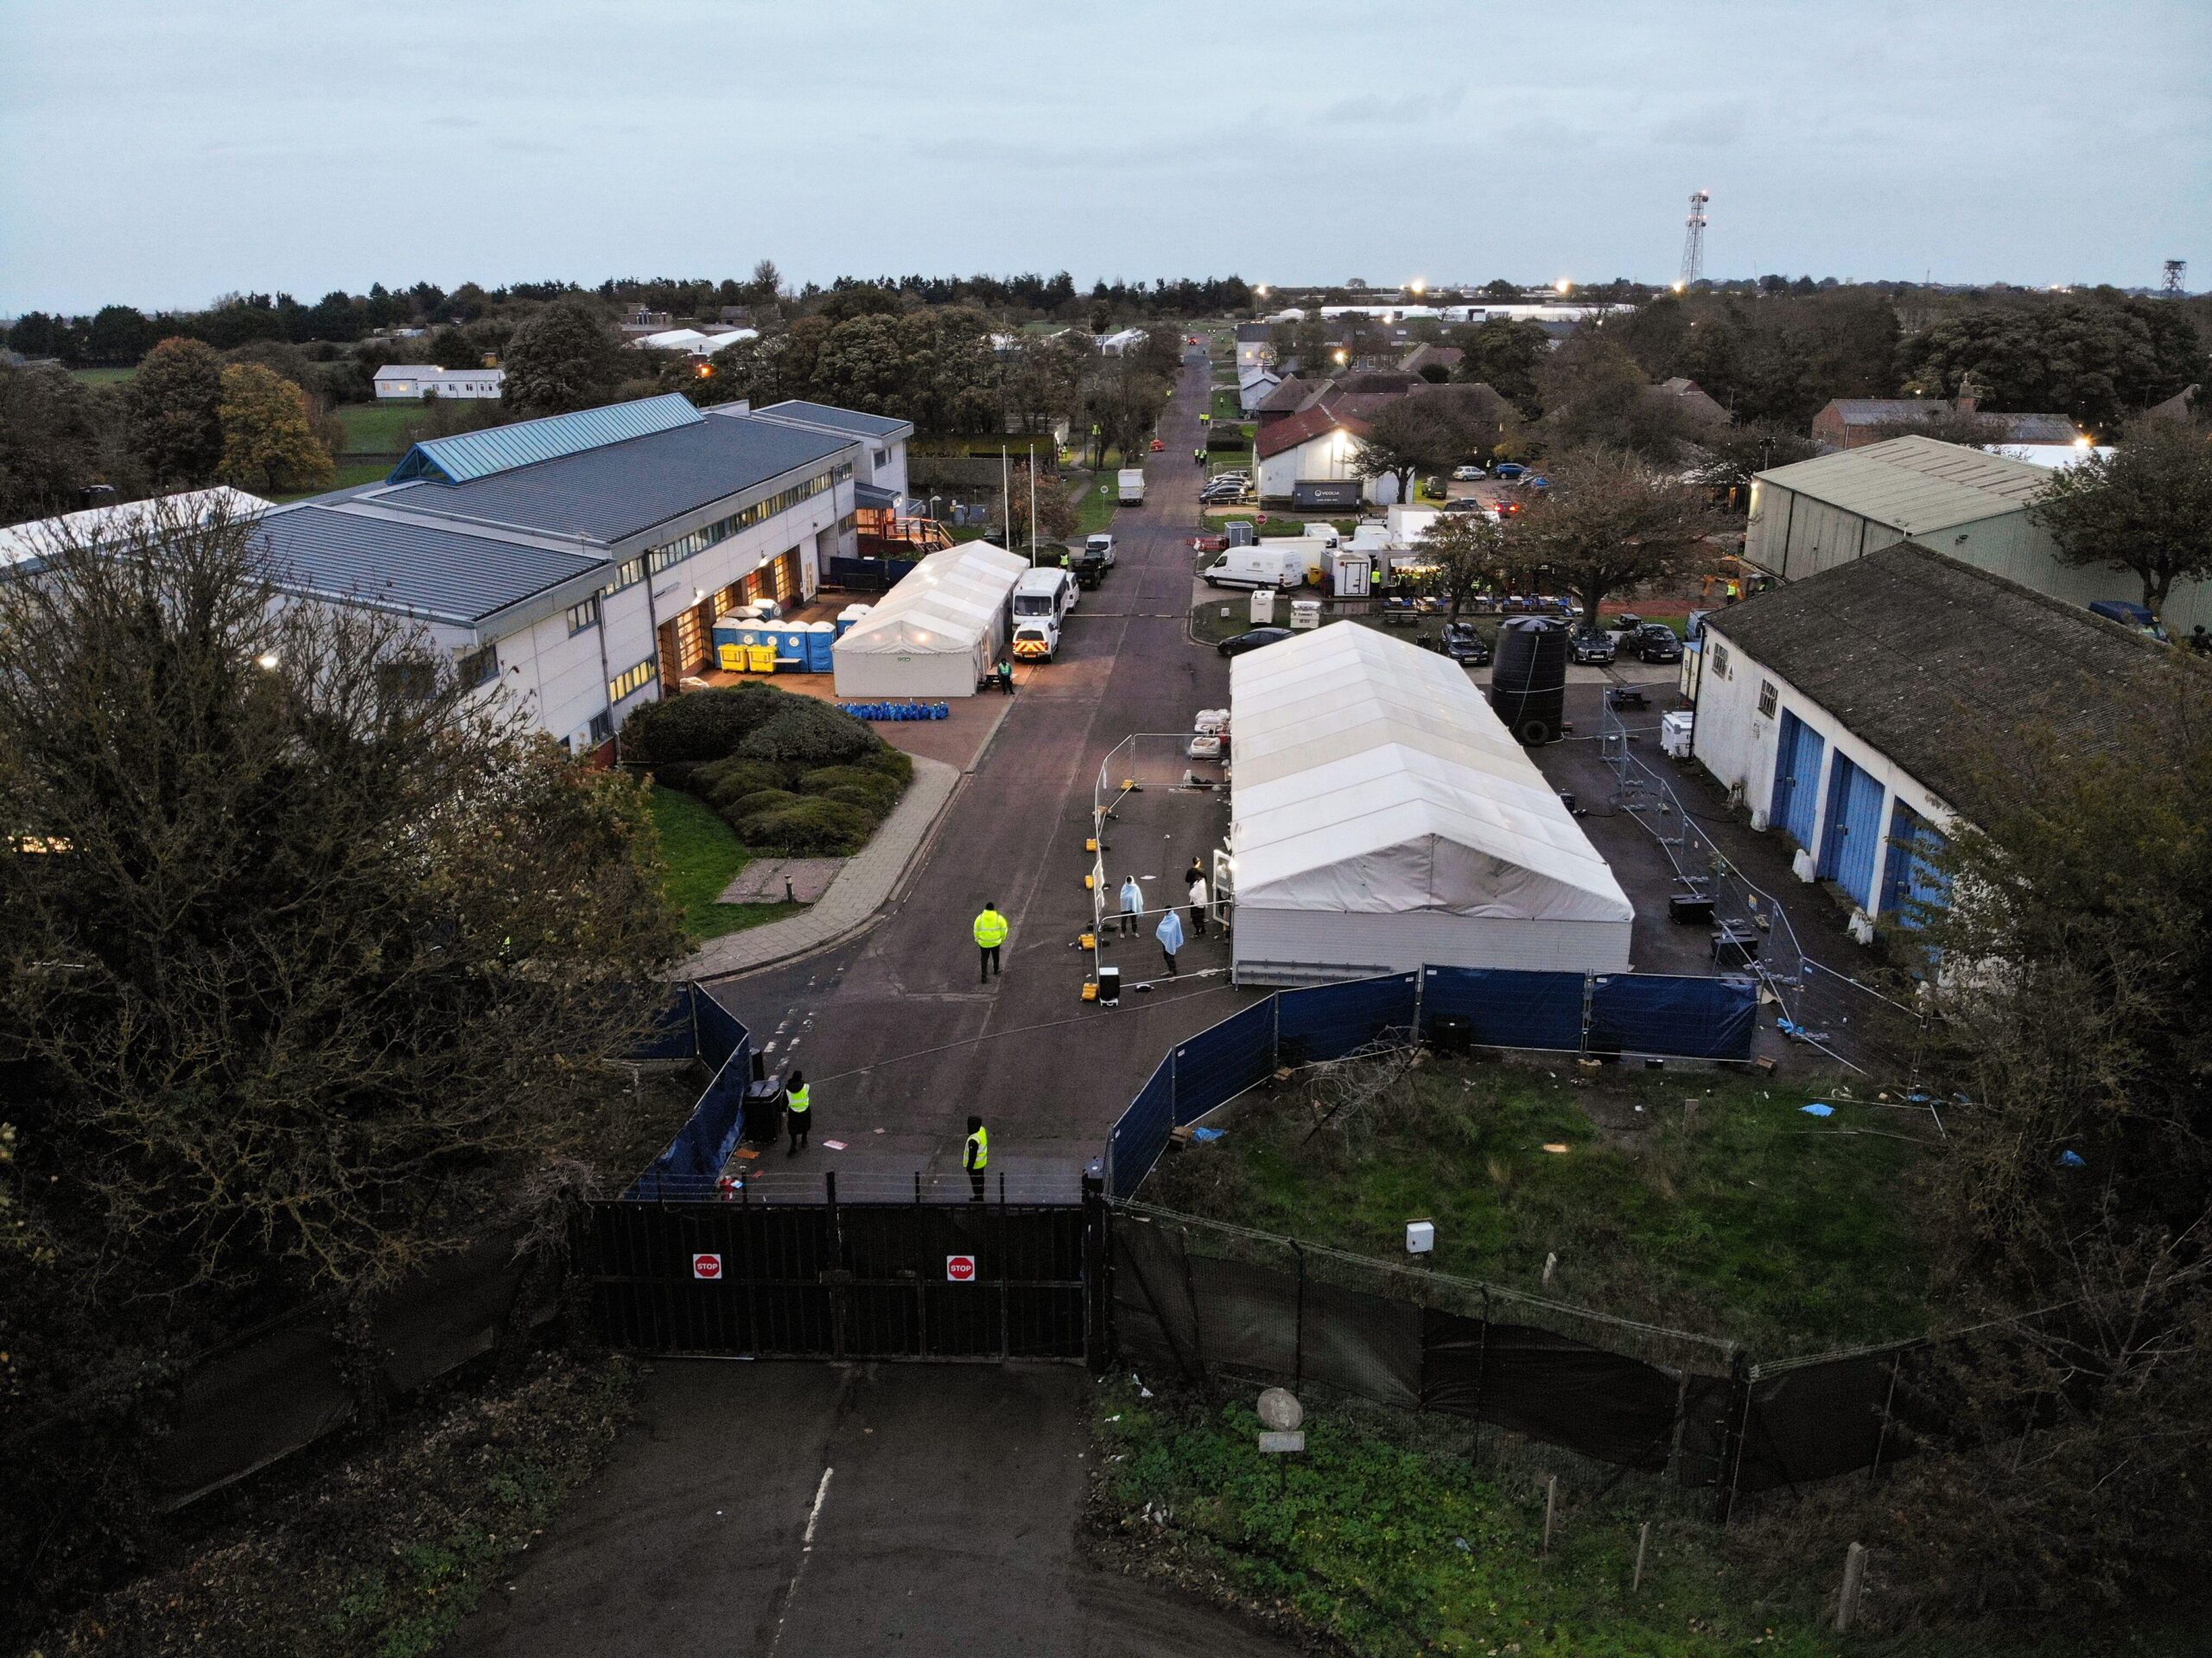 Asylum seekers at Manston were handcuffed, restrained and struck, internal docs show